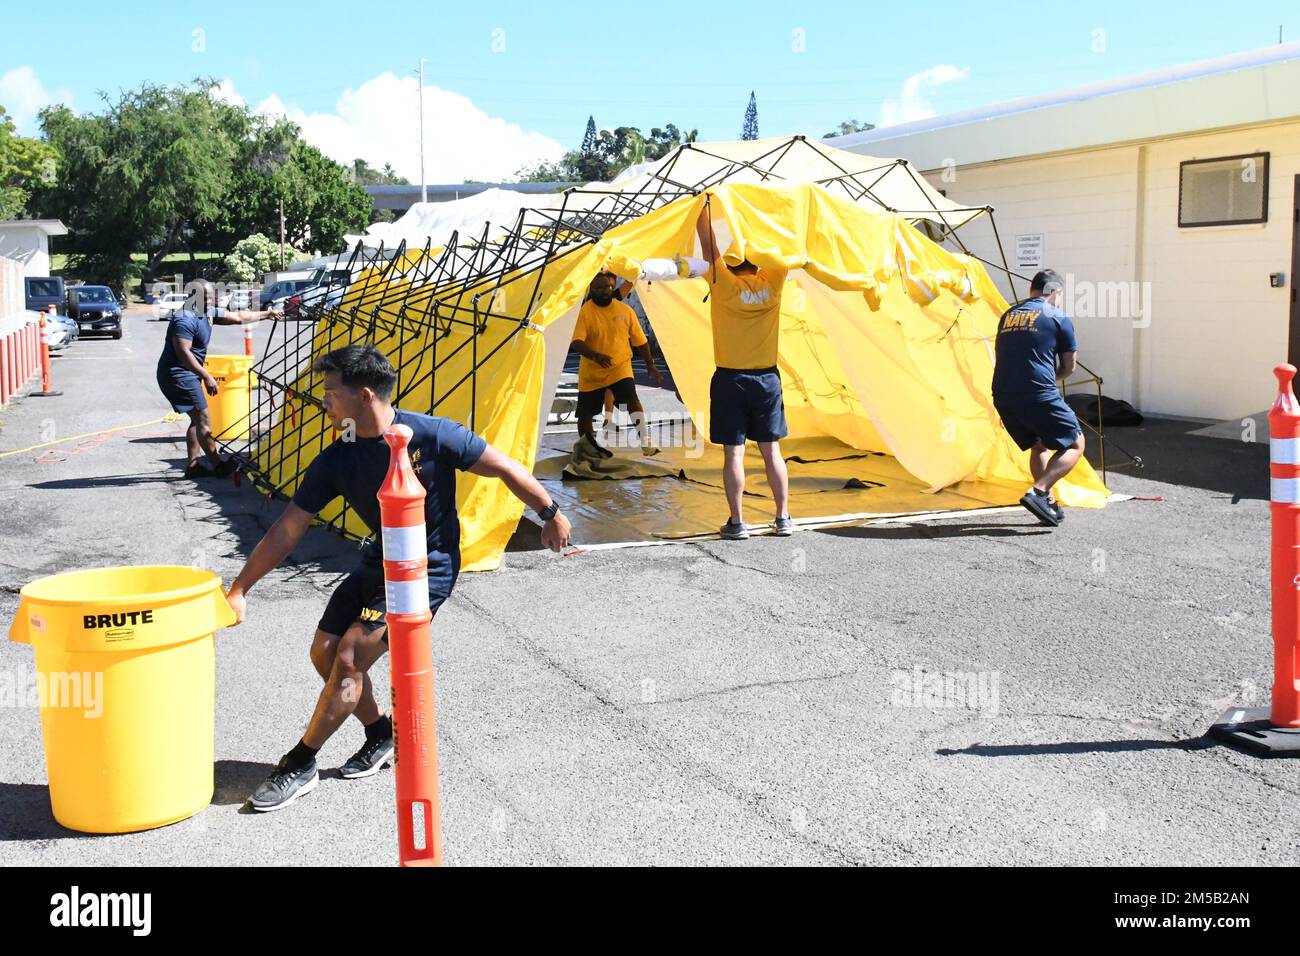 Sailors from Navy Medicine Readiness and Training Command Pearl Harbor set up a decontamination tent as part of the First Receiver Operations Training (FROT) held at Branch Health Clinic Makalapa on February 17, 2022. This yearly requirement teaches Sailors to properly decontaminate patients prior to administering medical care in the event of a Chemical, Biological, Radiological, or Nuclear (CBRN) incident. Stock Photo